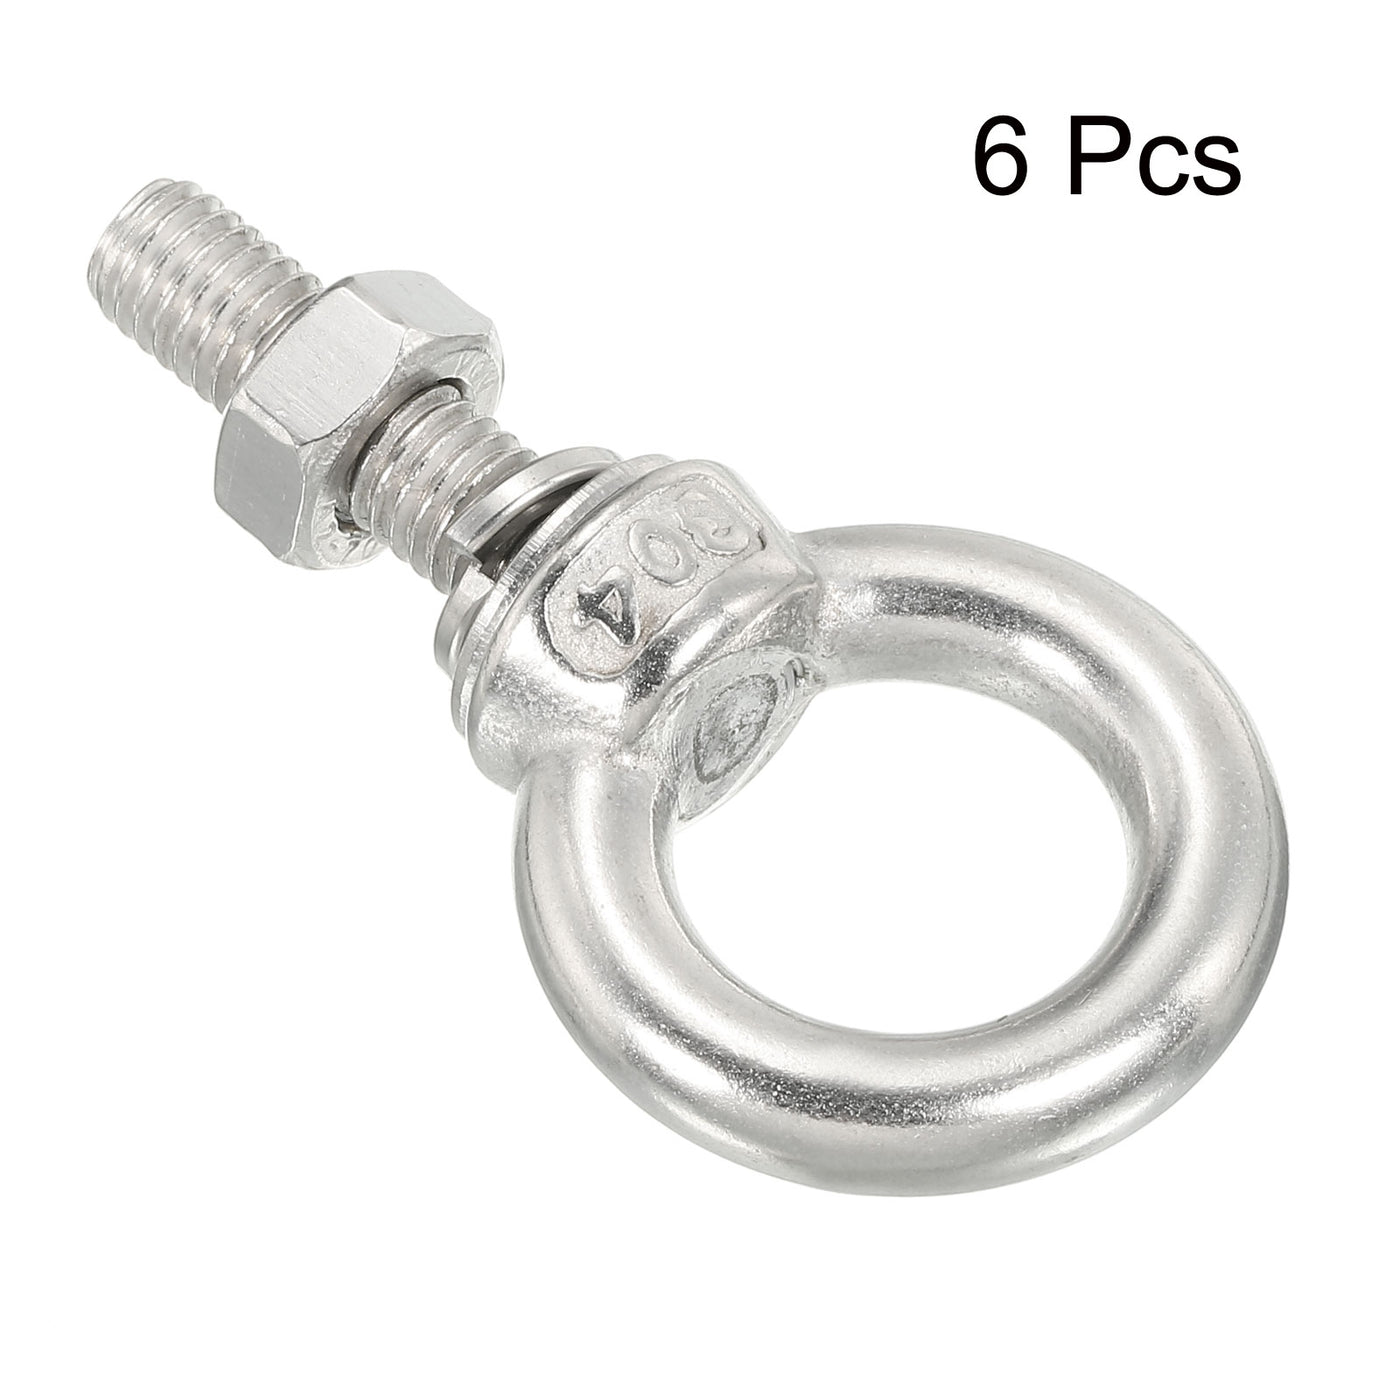 uxcell Uxcell M8x30 5/16"x1.18" Stainless Steel Eye Bolts Threaded Screw Eyebolt Shoulder Ring with Nuts Washers for Lifting Hanging, 6 Set